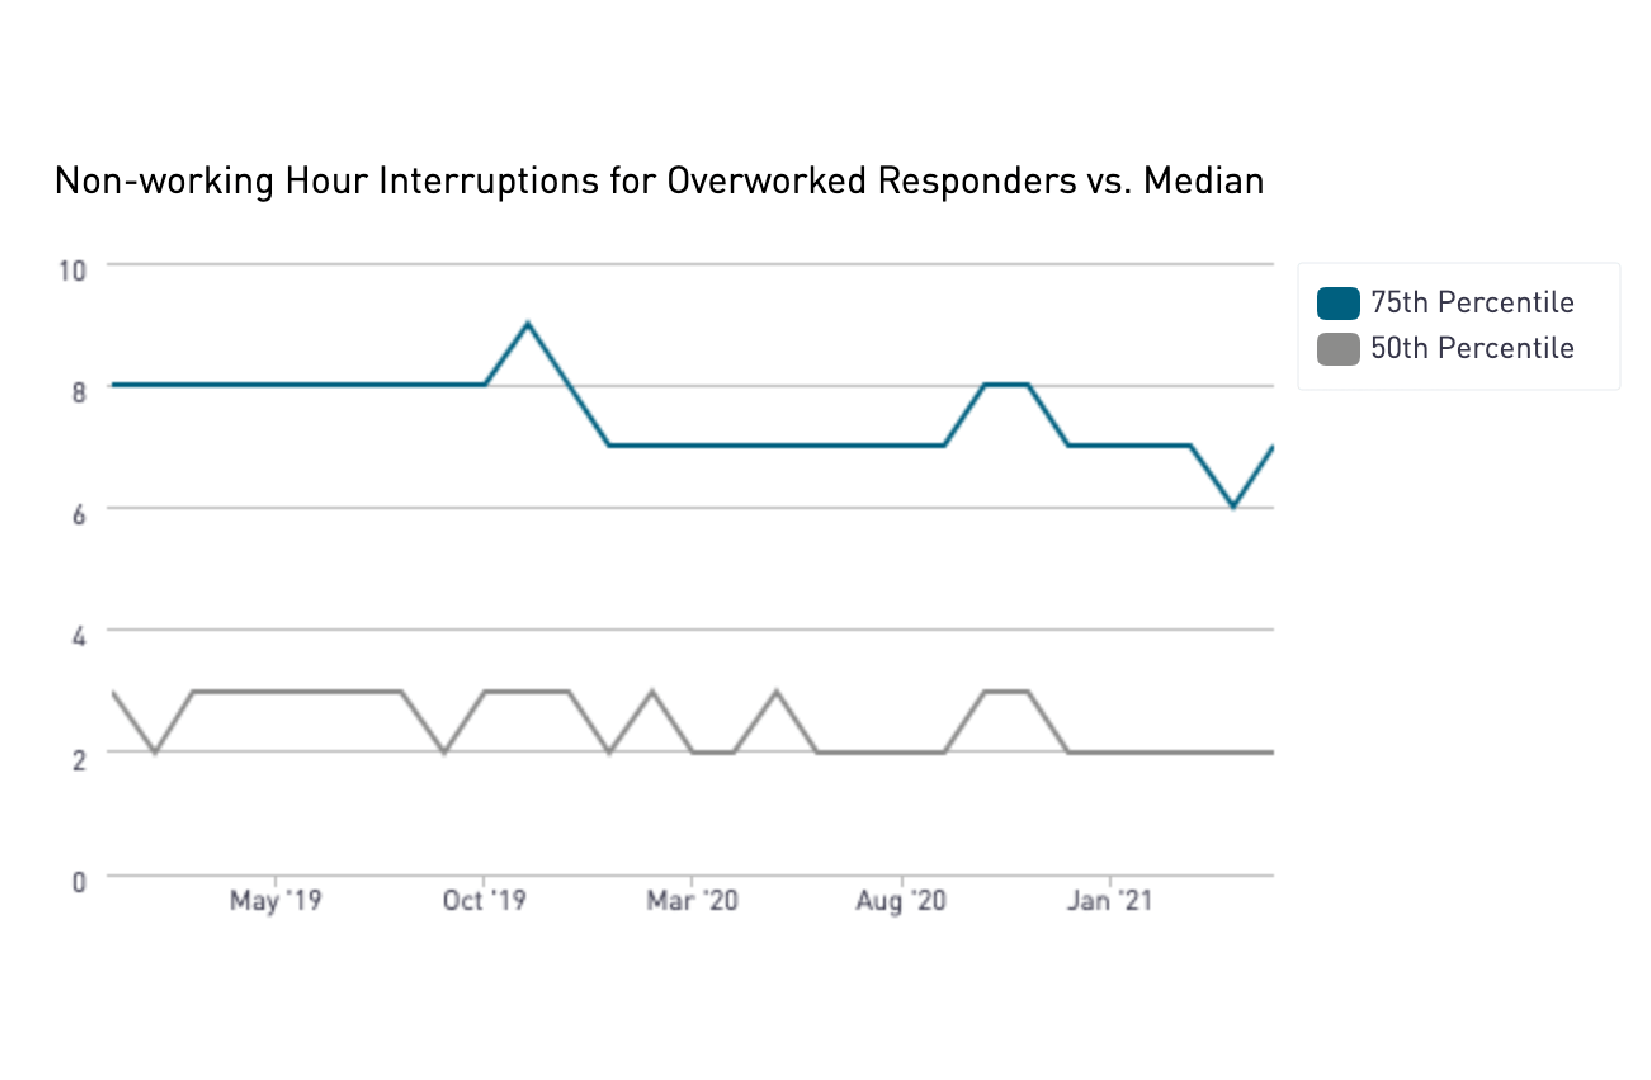 Chart 7: Non-working Hour Interruptions for Overworked Responders vs. Median